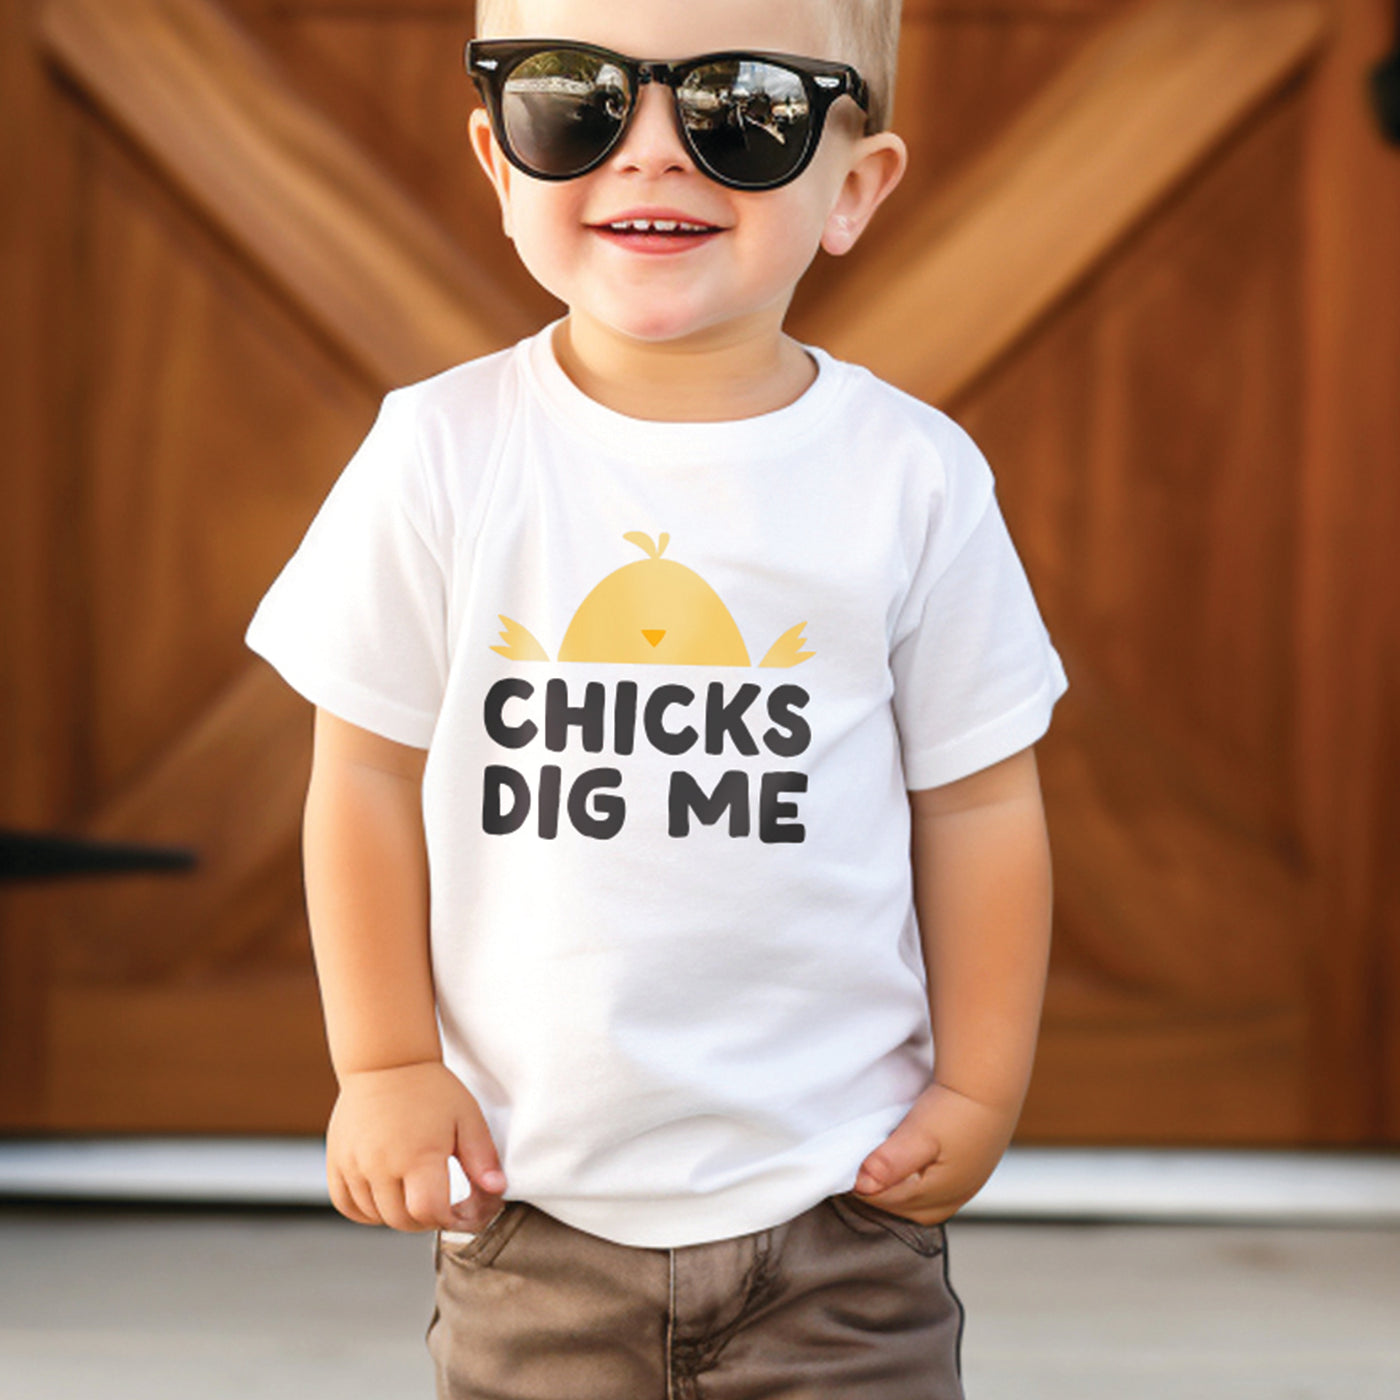 Little boy wearing white short sleeve tshirt with black chillin like a villain print, standing outside wearing sunglasses and jeans with hands in pocket